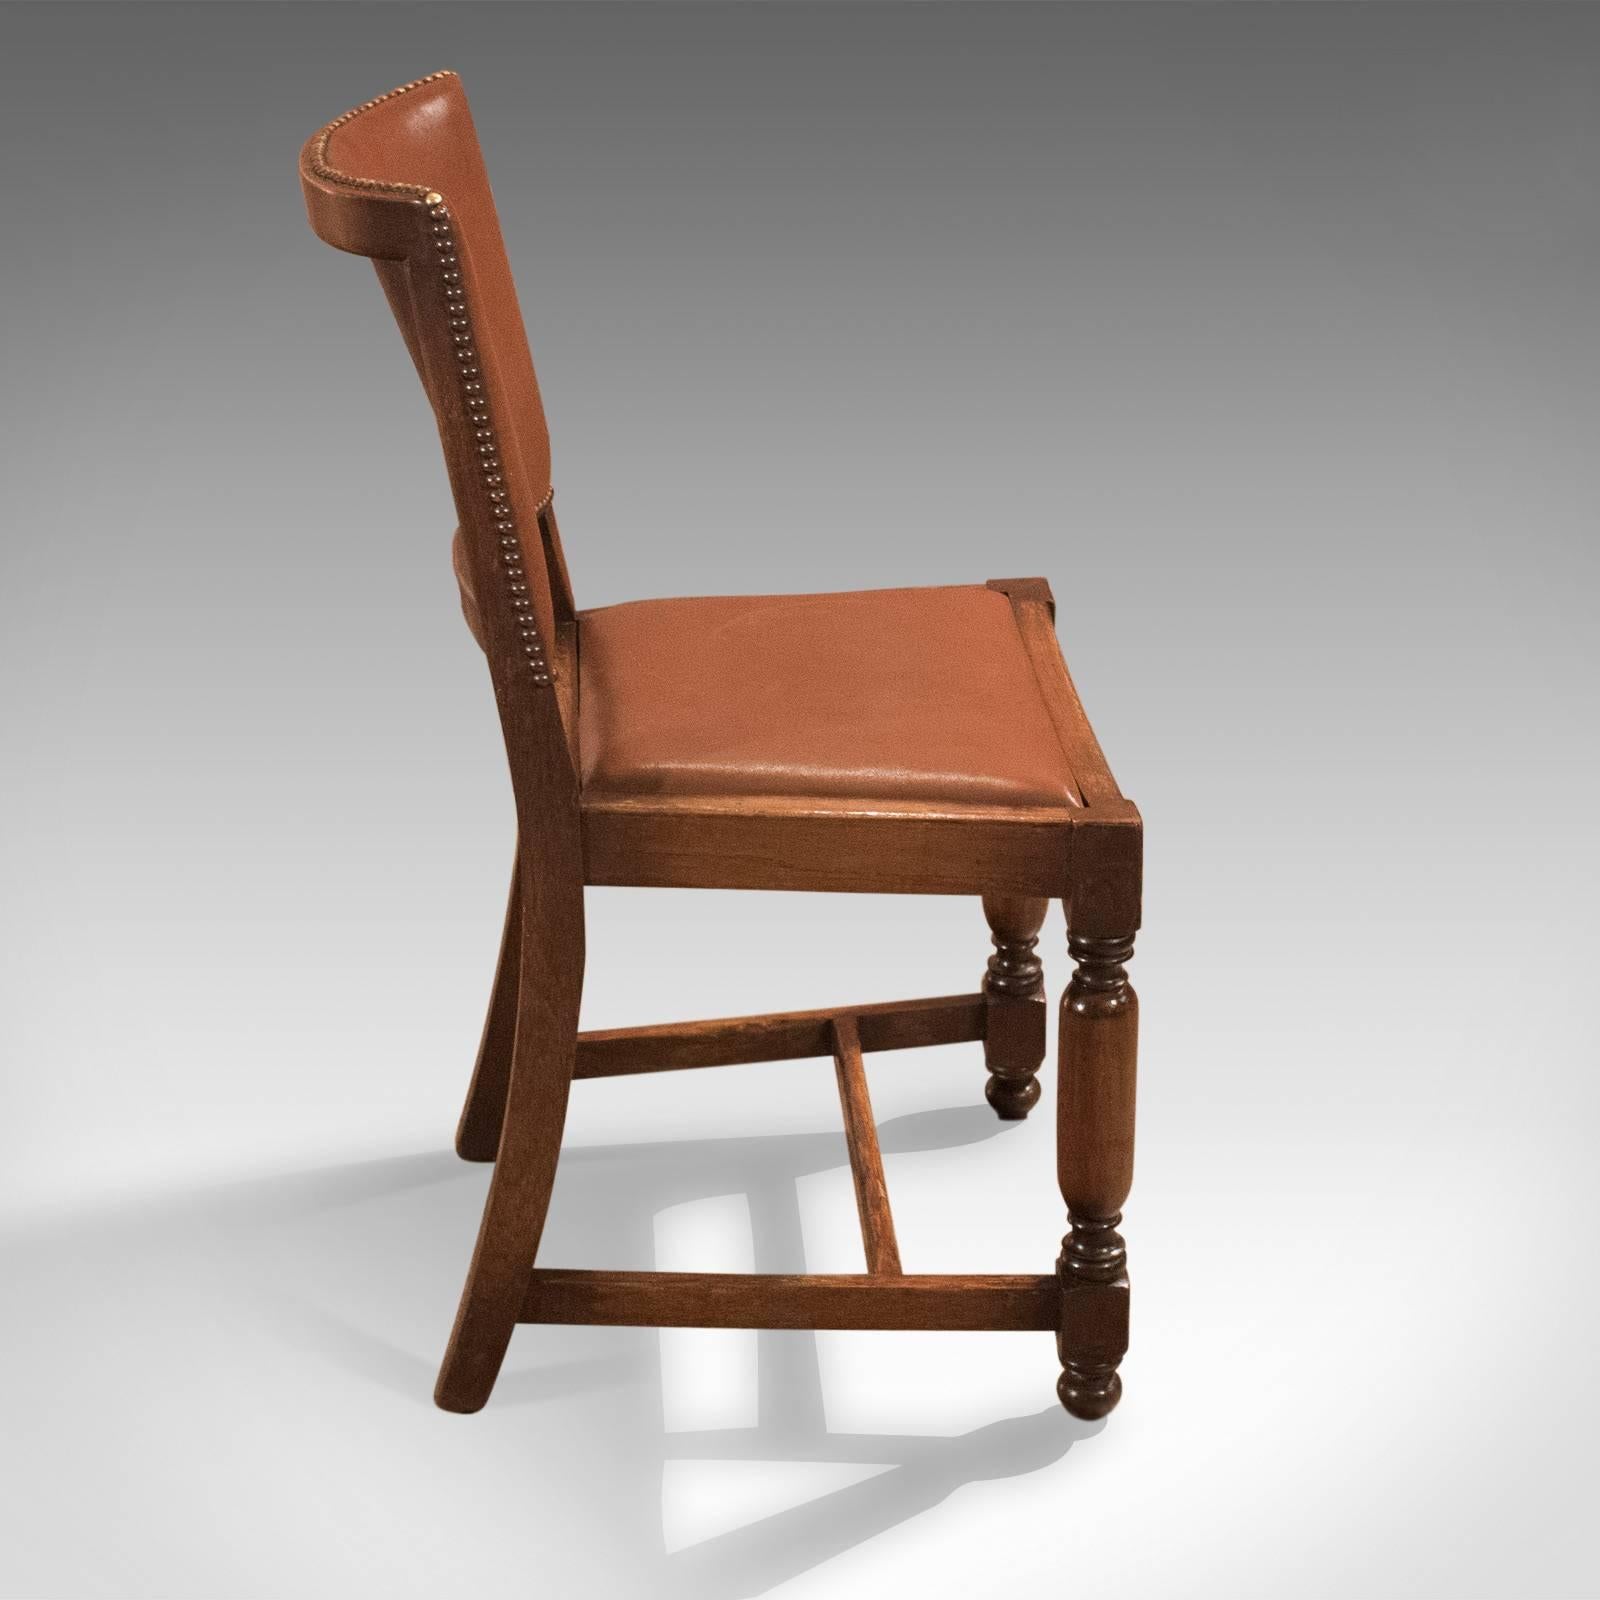 British Set of Four Antique Dining Chairs, Edwardian Oak and Leather, circa 1910